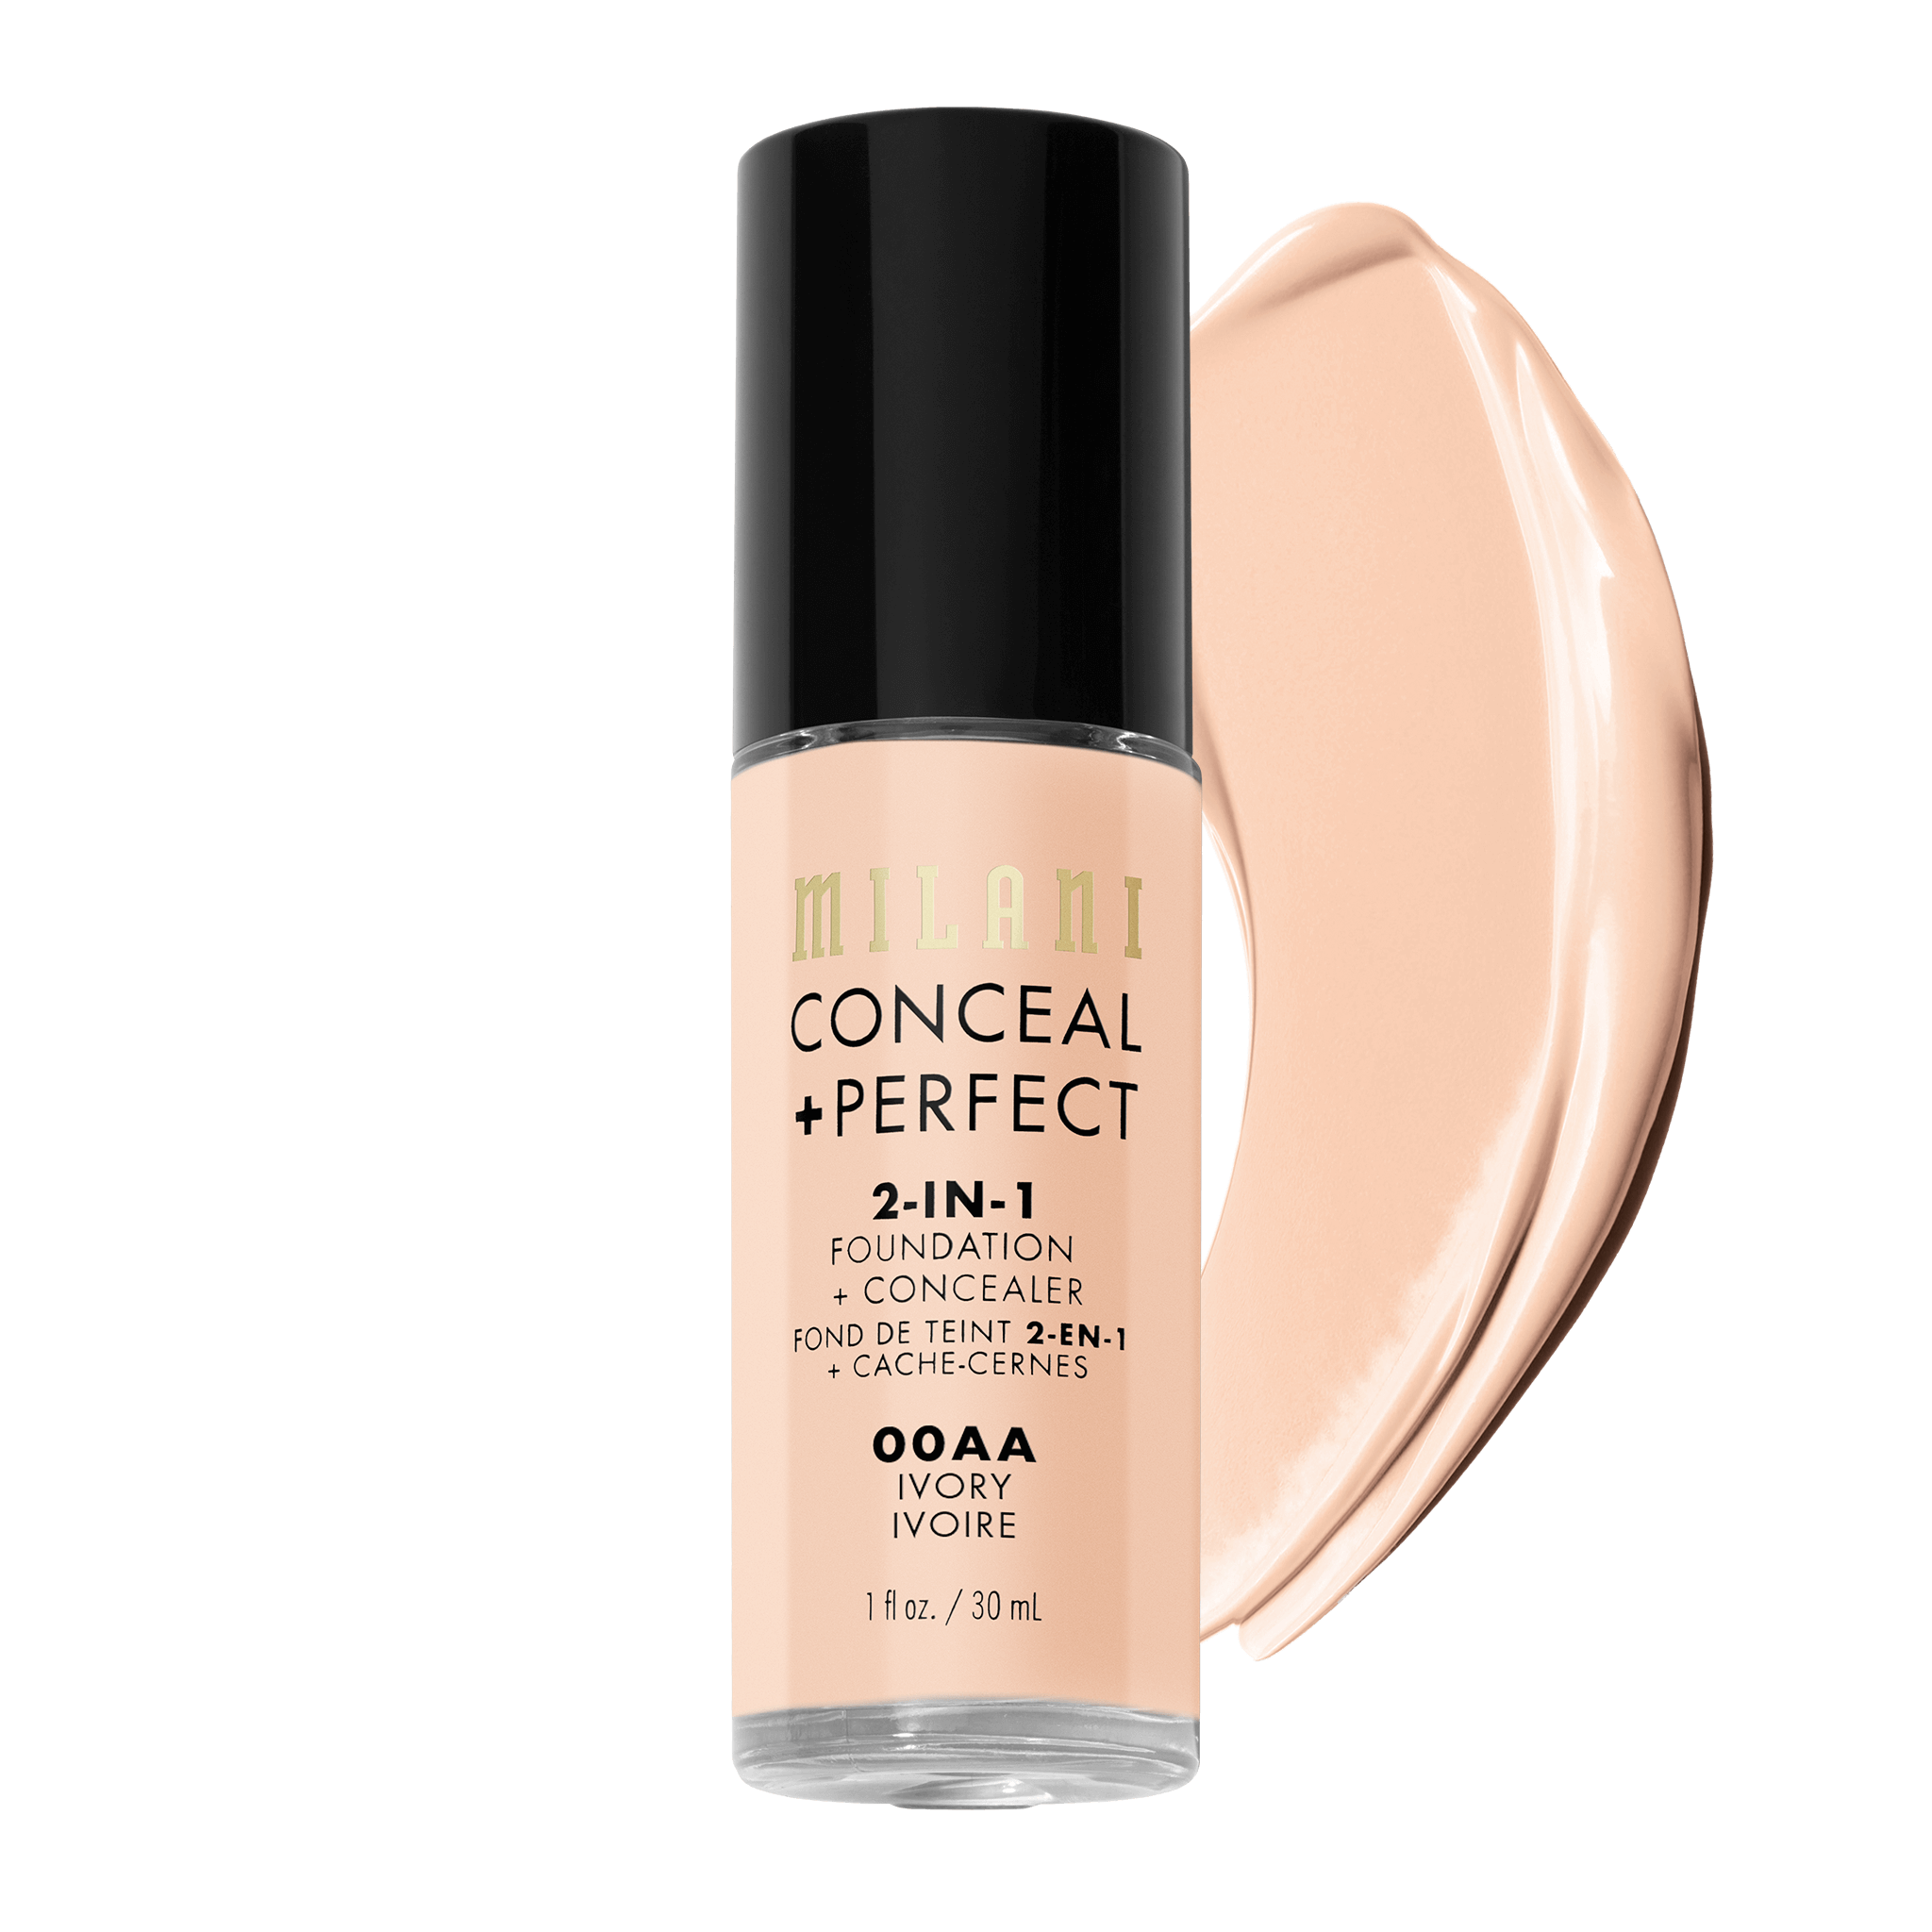 Milani Conceal + Perfect 2-In-1 Foundation + Concealer – Ivory